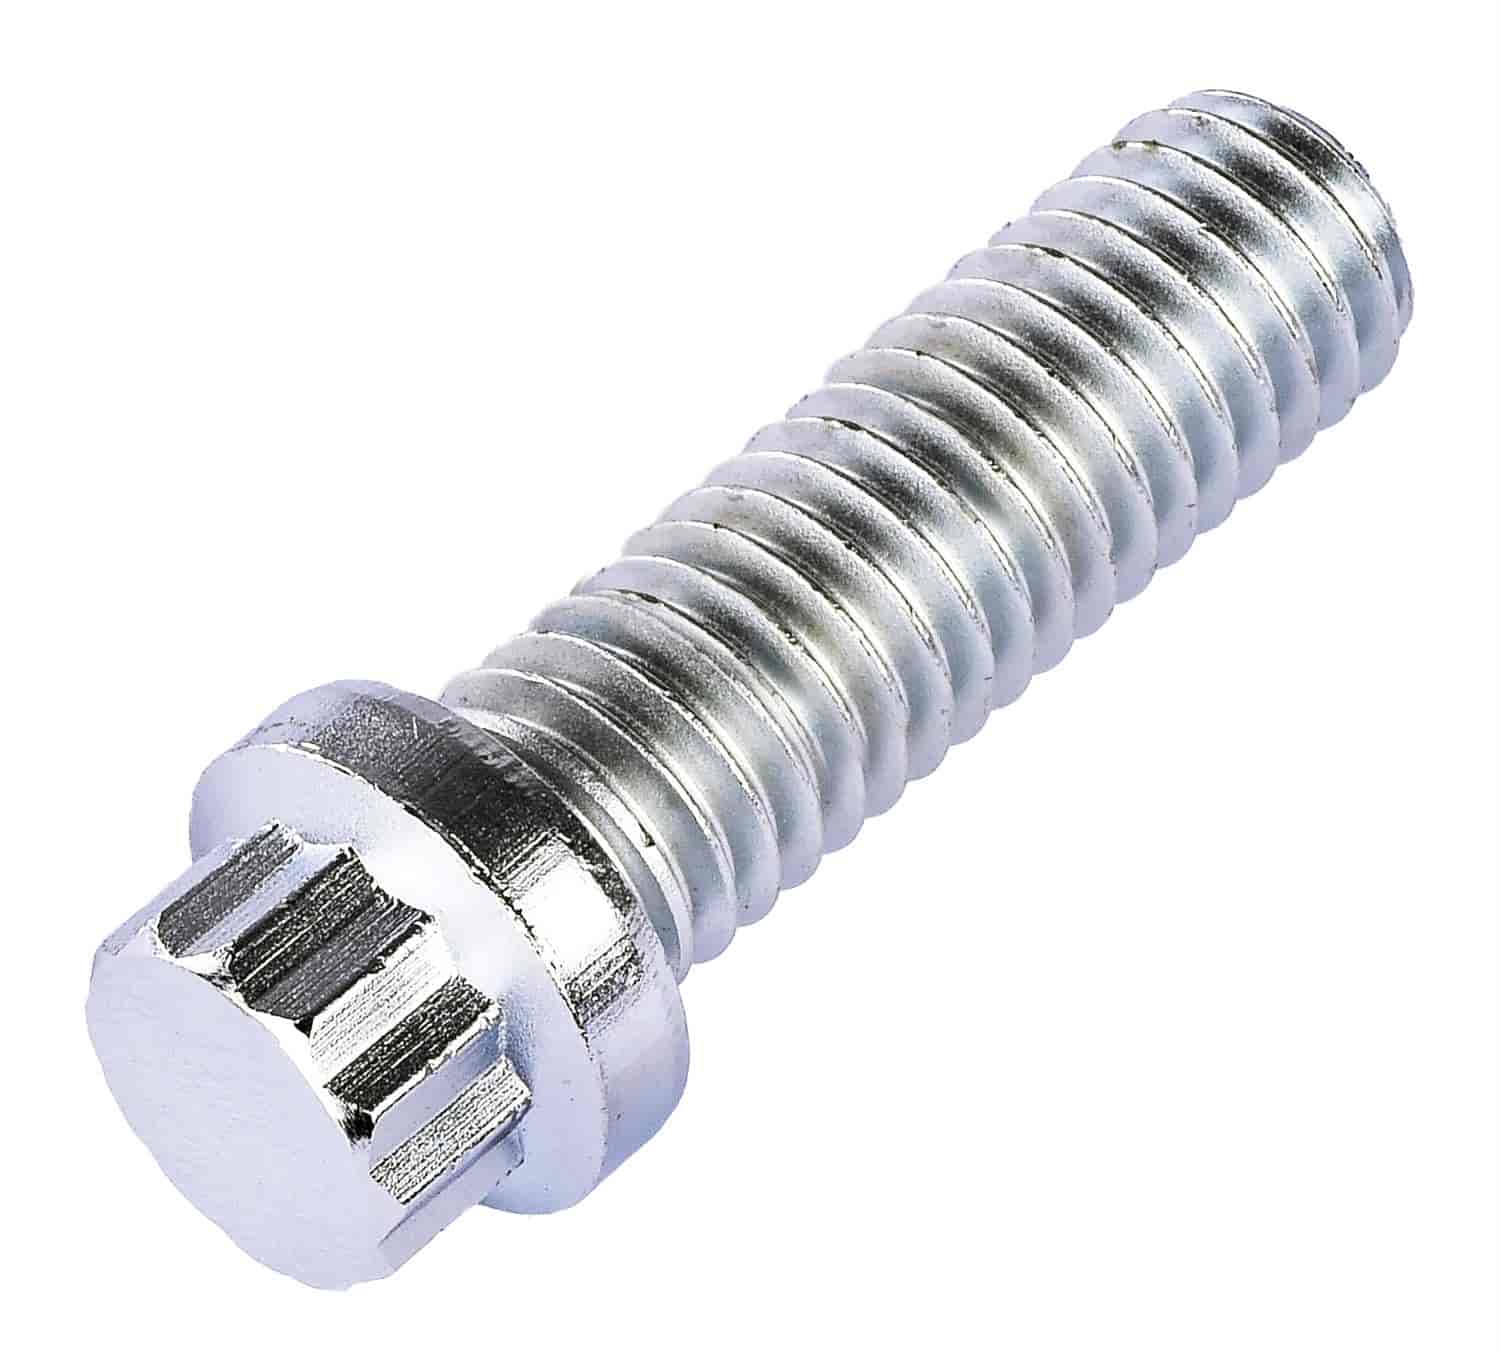 12-Point Fastener [3/8 in. -16 Thread x 1 1/4 (.250) in. Length]